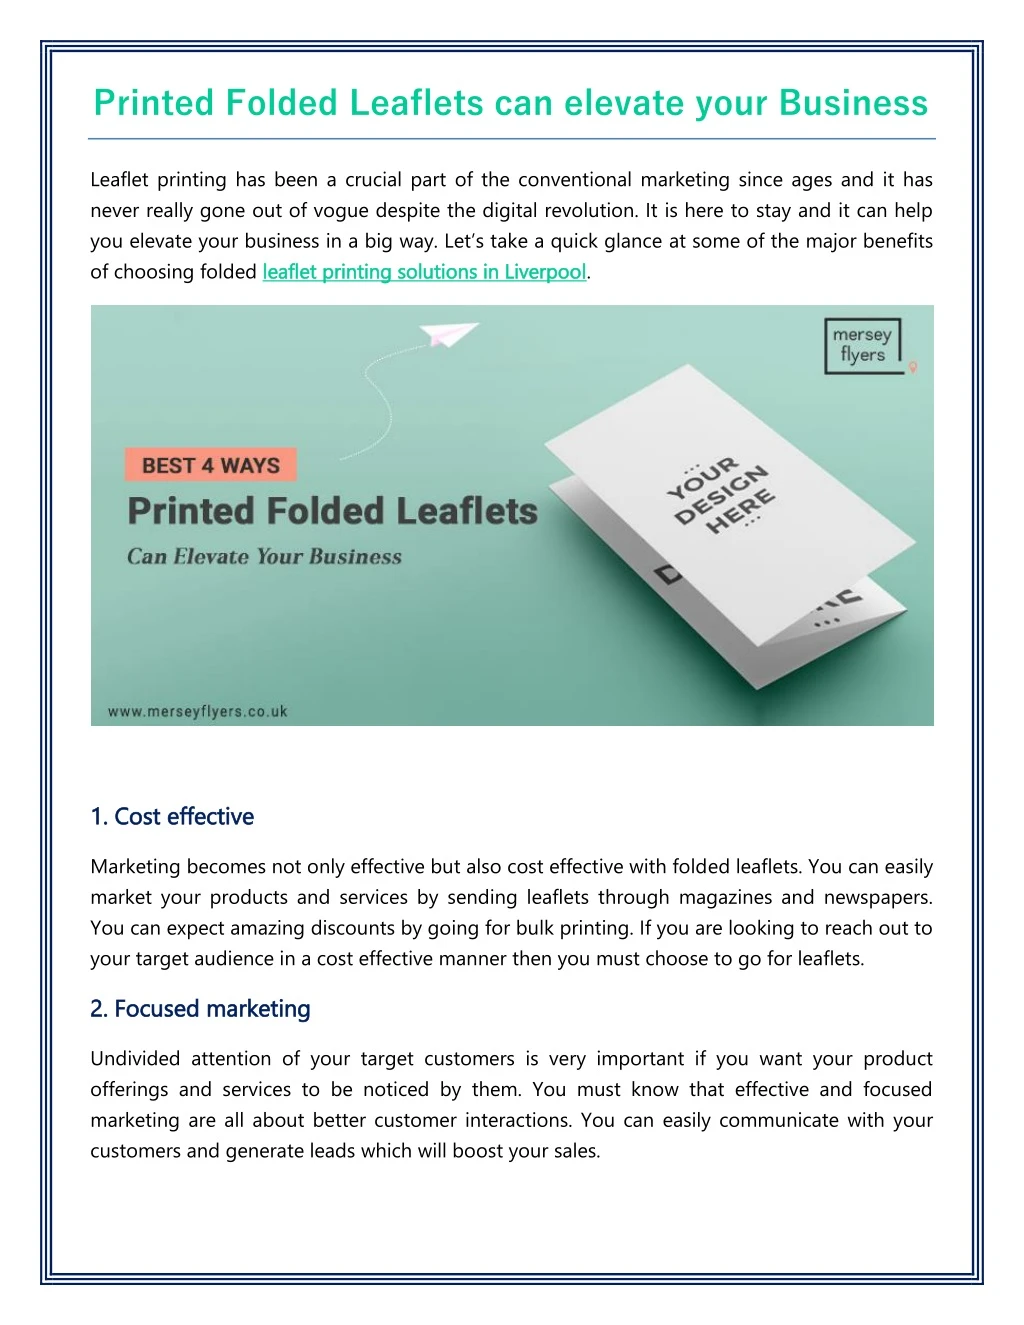 printed folded leaflets can elevate your business